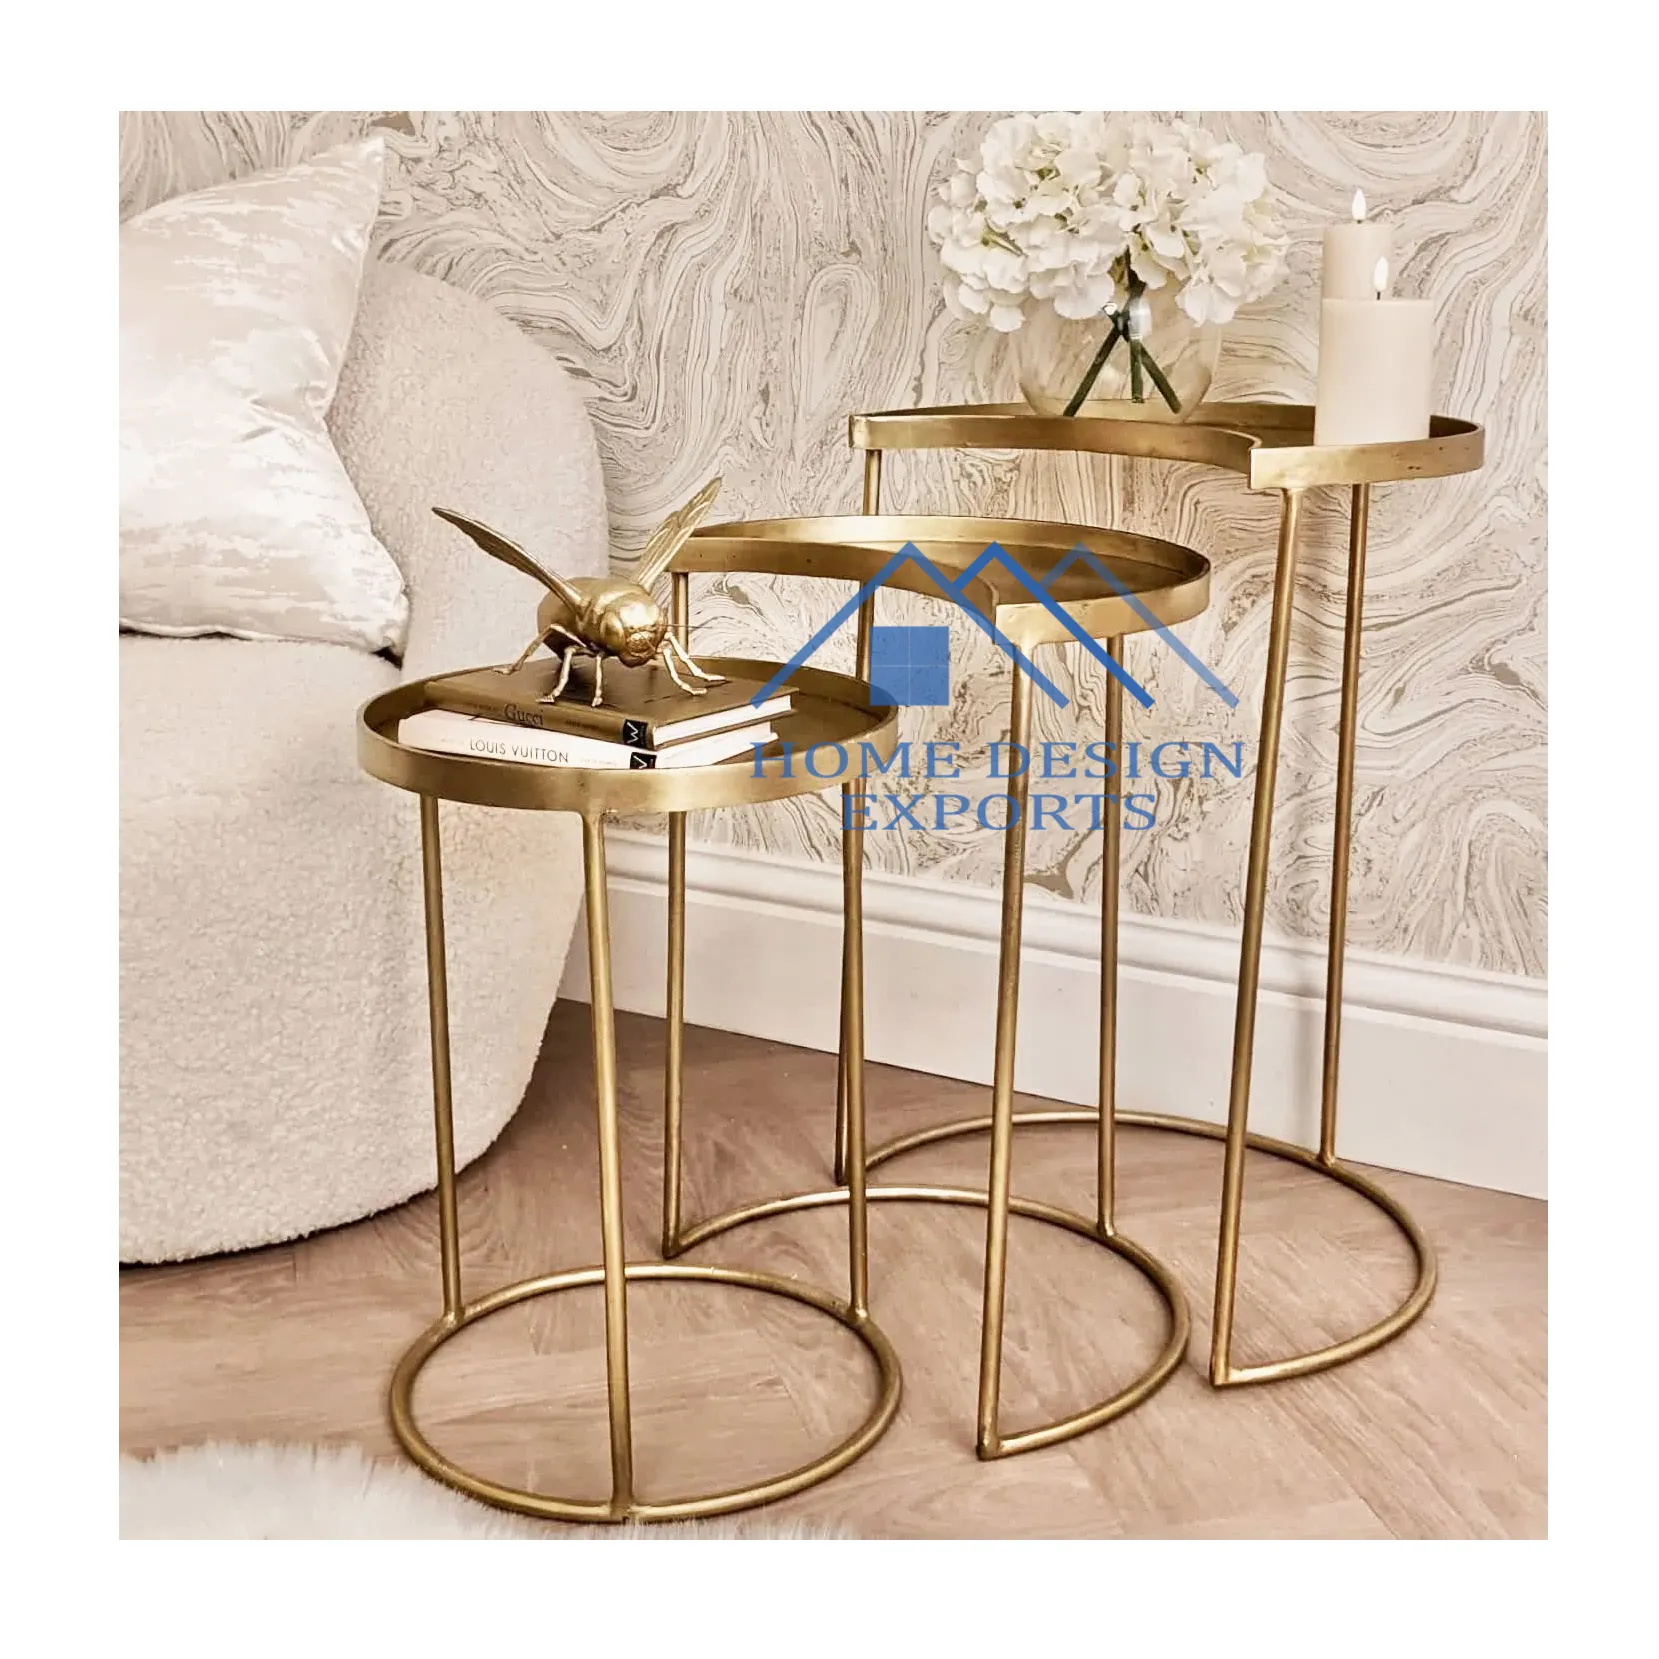 Exclusive Modern Metal Antique Gold Nesting Coffee Tables for Bedroom and Living Room 2022 New Design Unique Iron Nested Tables